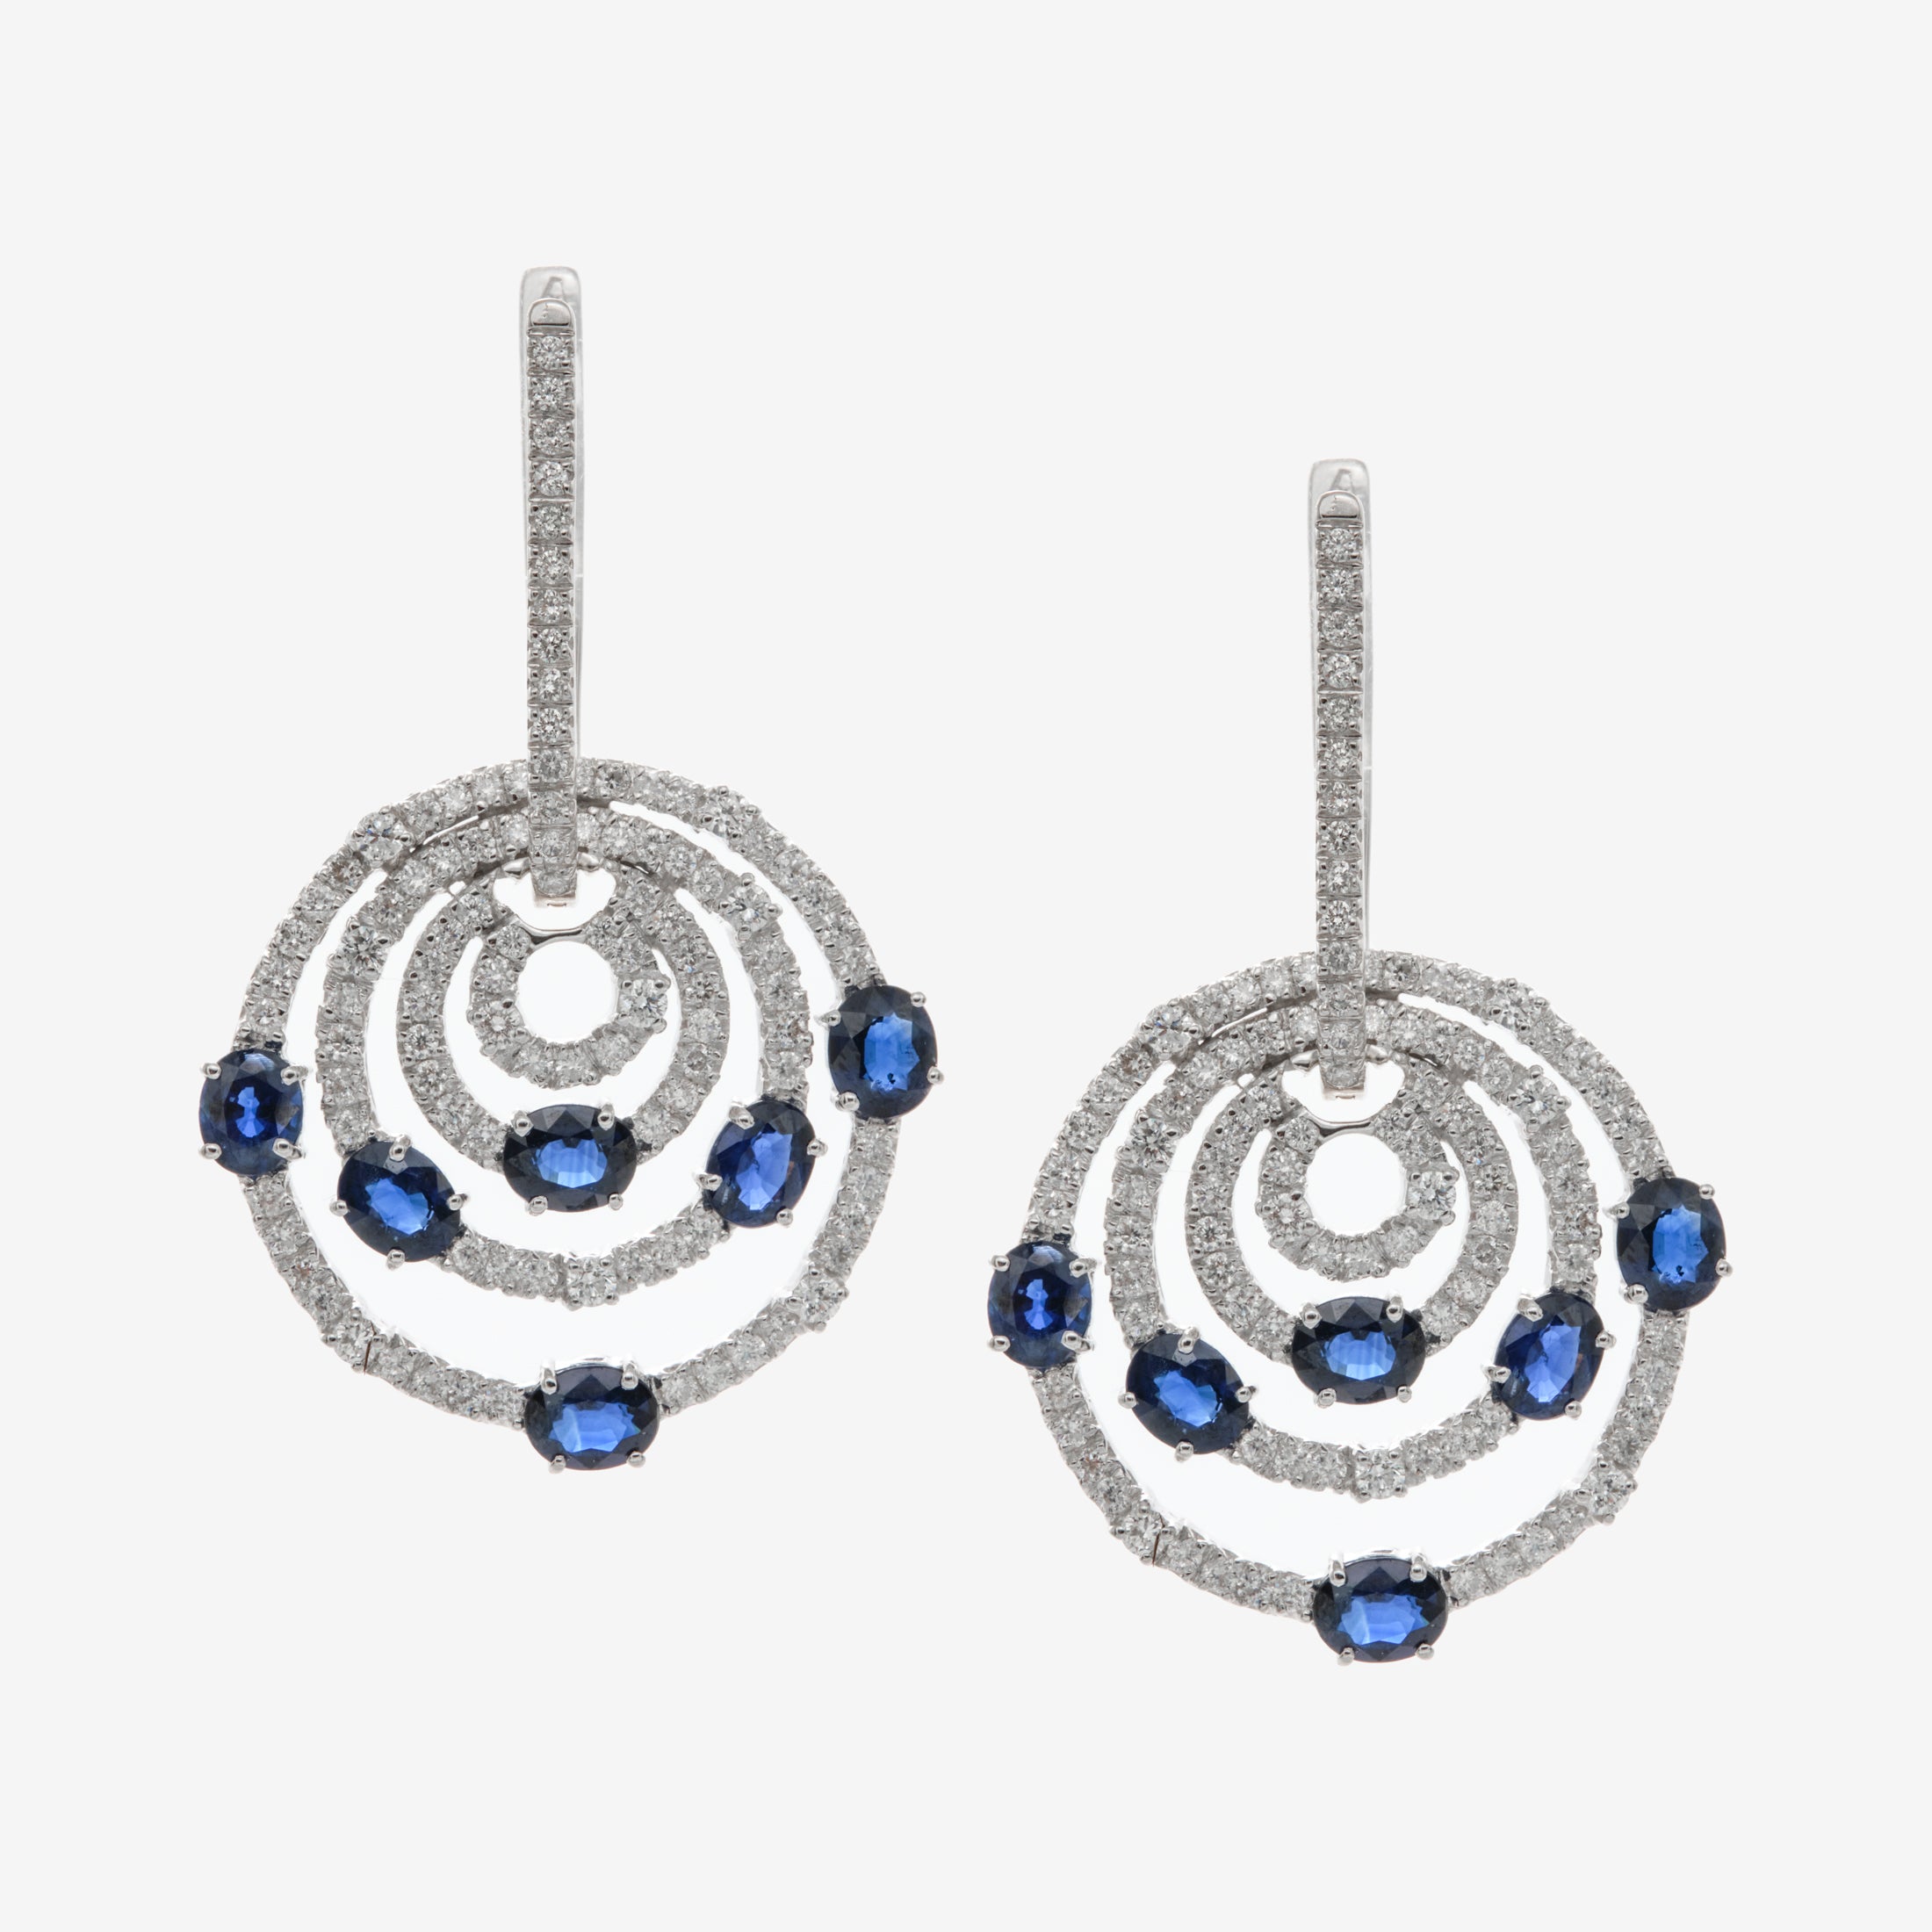 Fiorela earrings with sapphires and diamonds